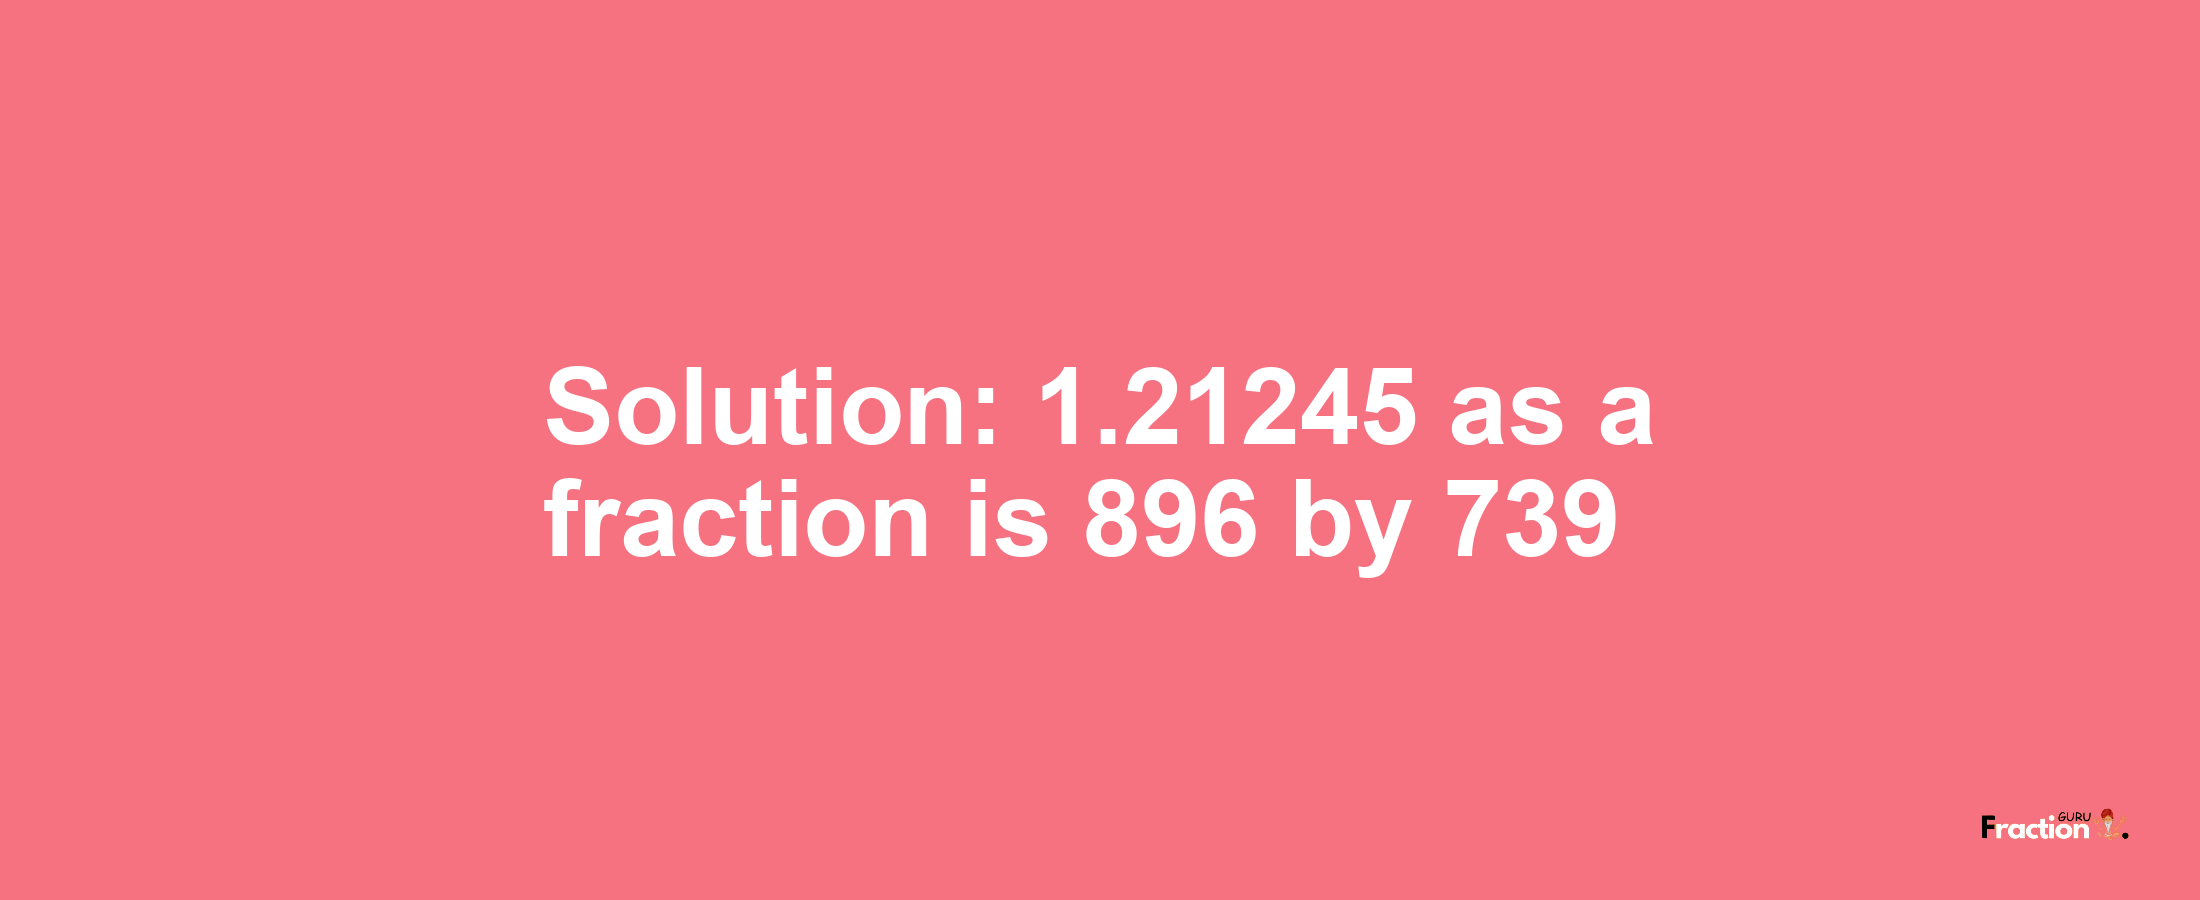 Solution:1.21245 as a fraction is 896/739